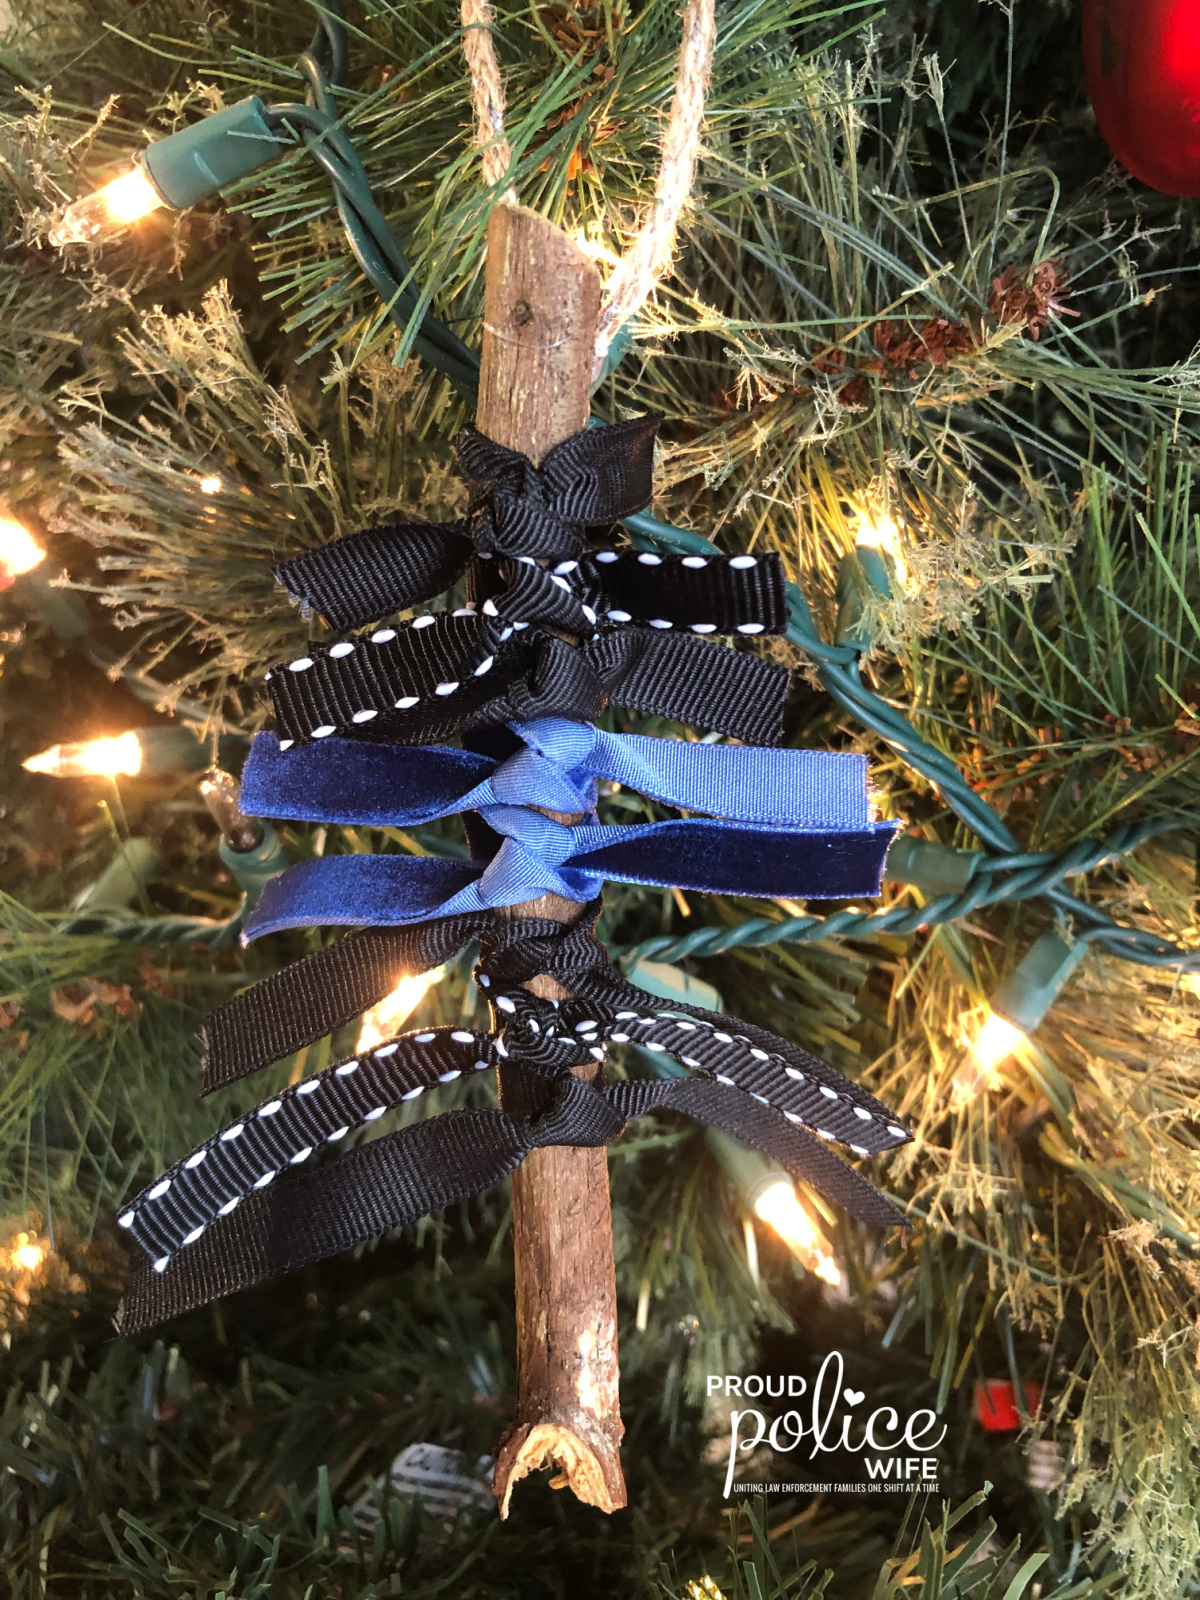 Diy Easy Thin Blue Line Crafts And Ts For Christmas